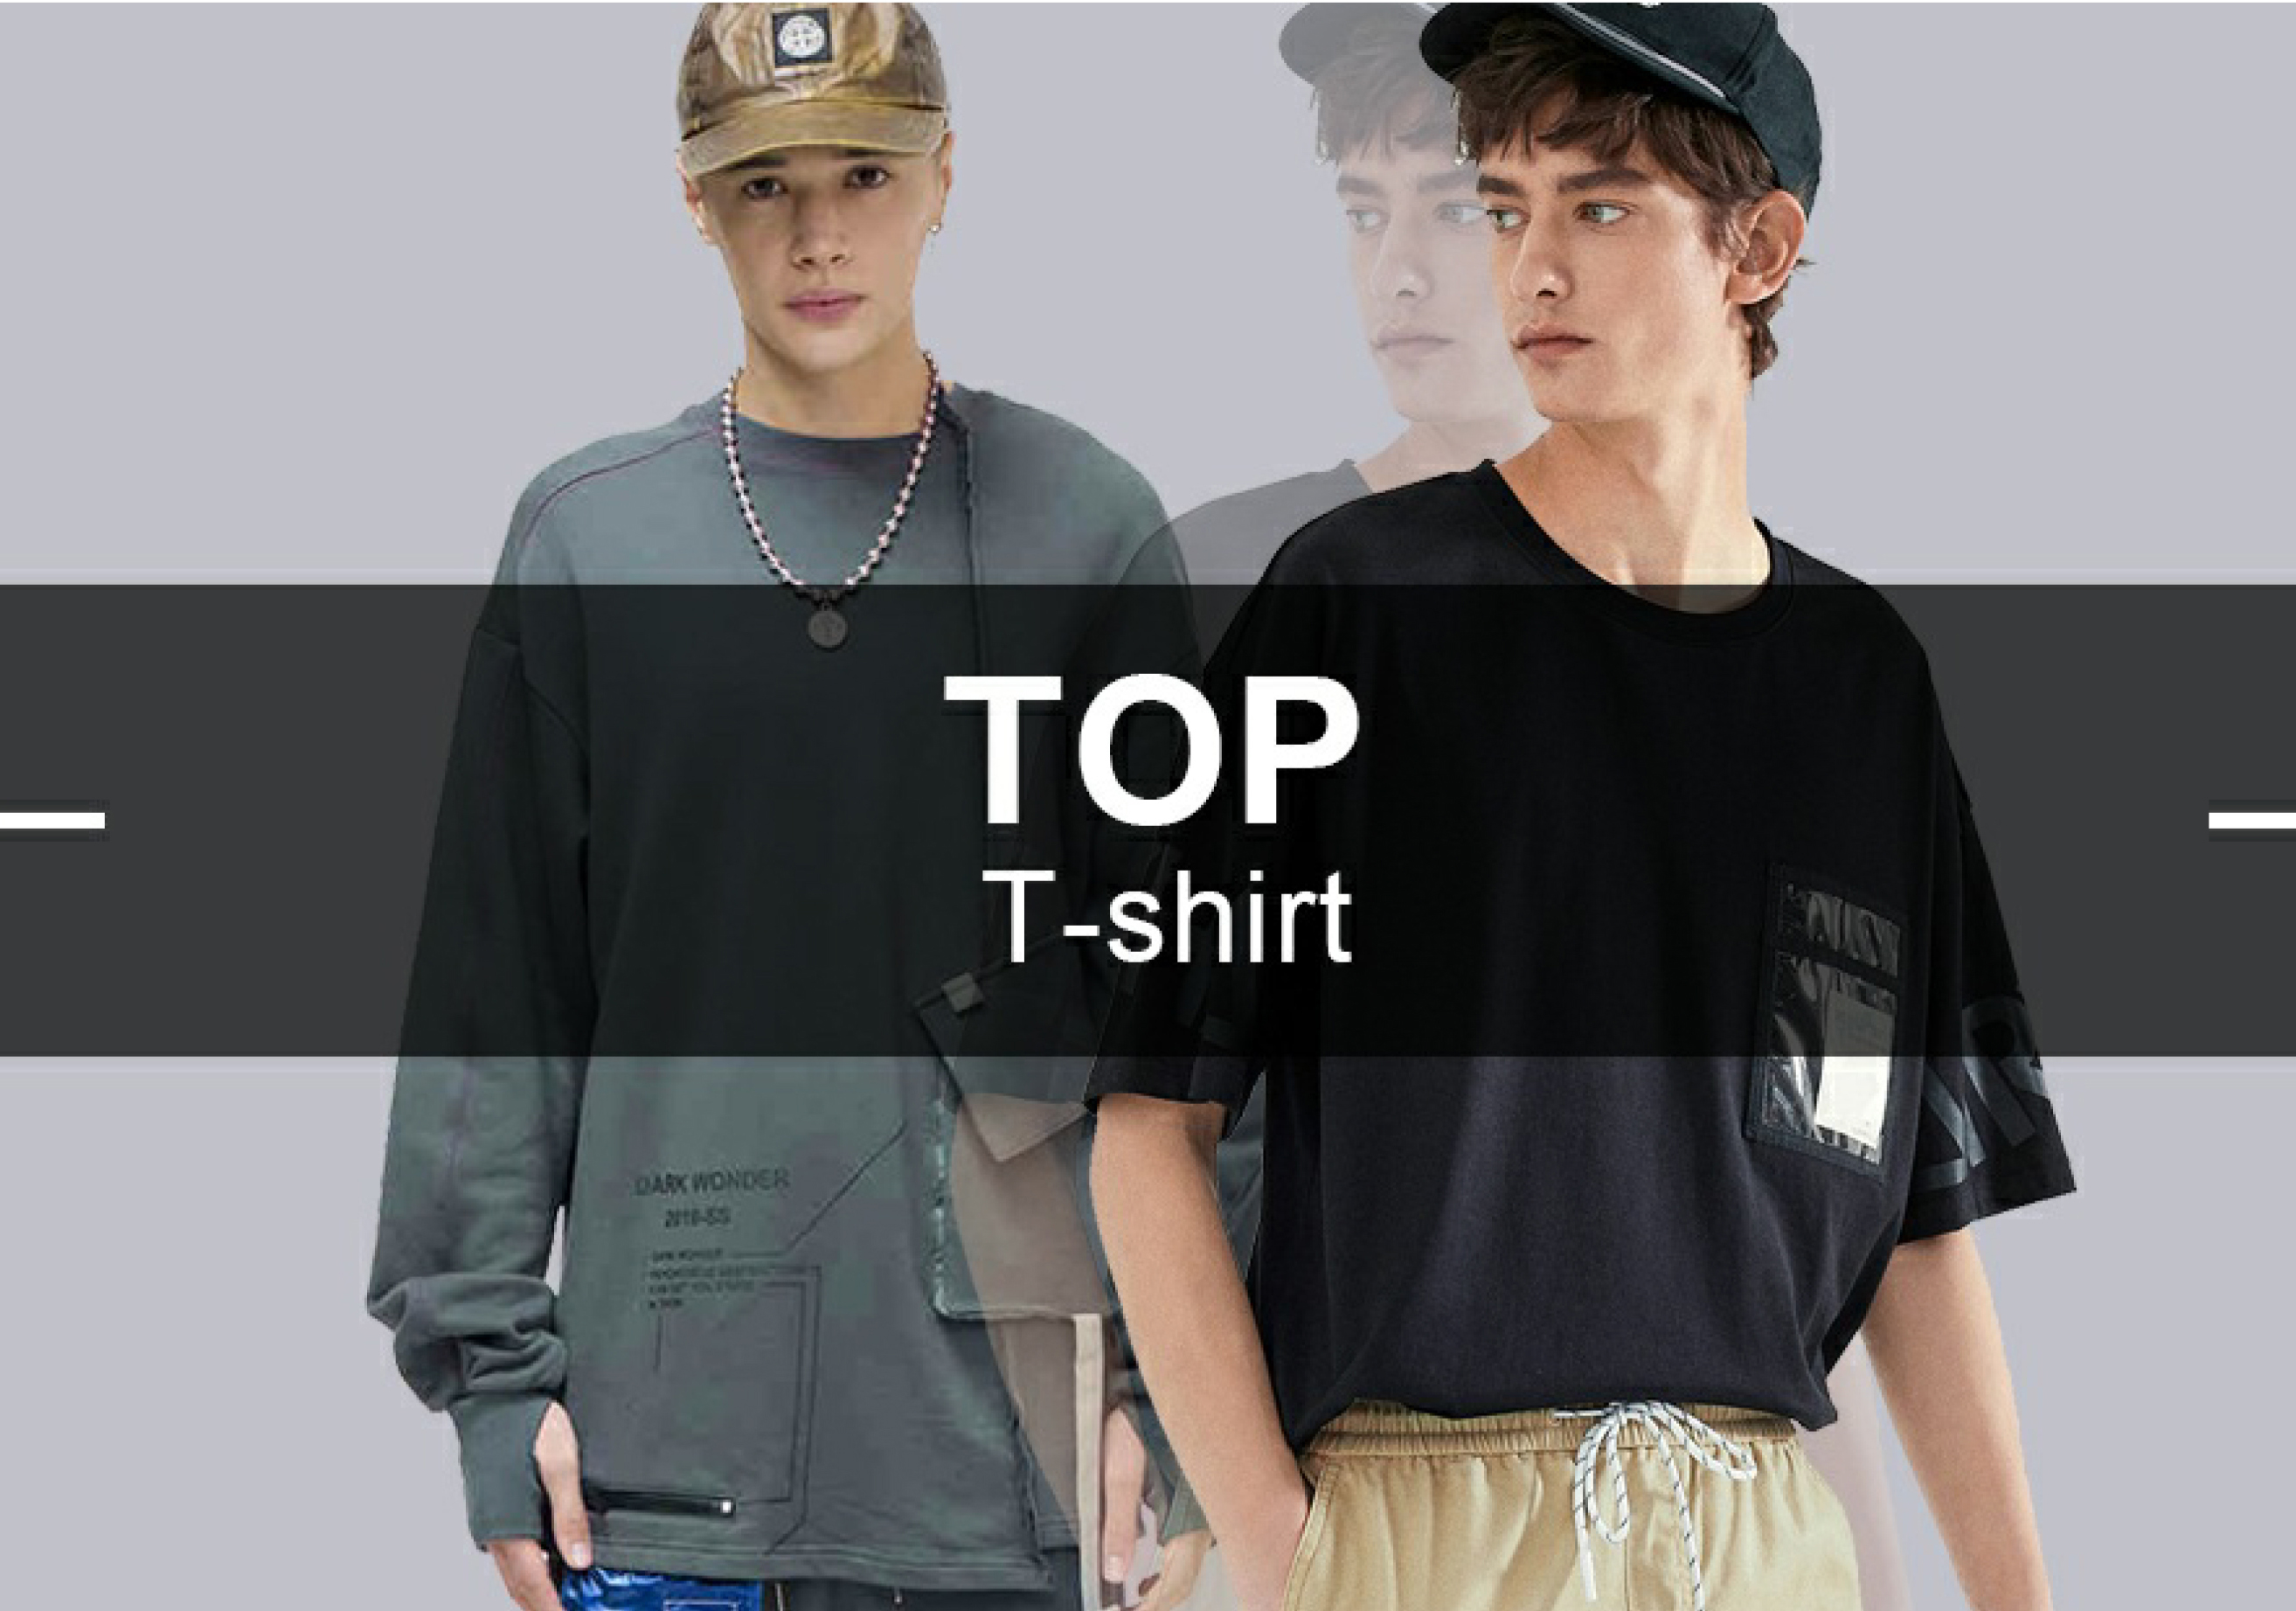 T-Shirt -- 2019 Resort Recommended Hot Items in Menswear Market